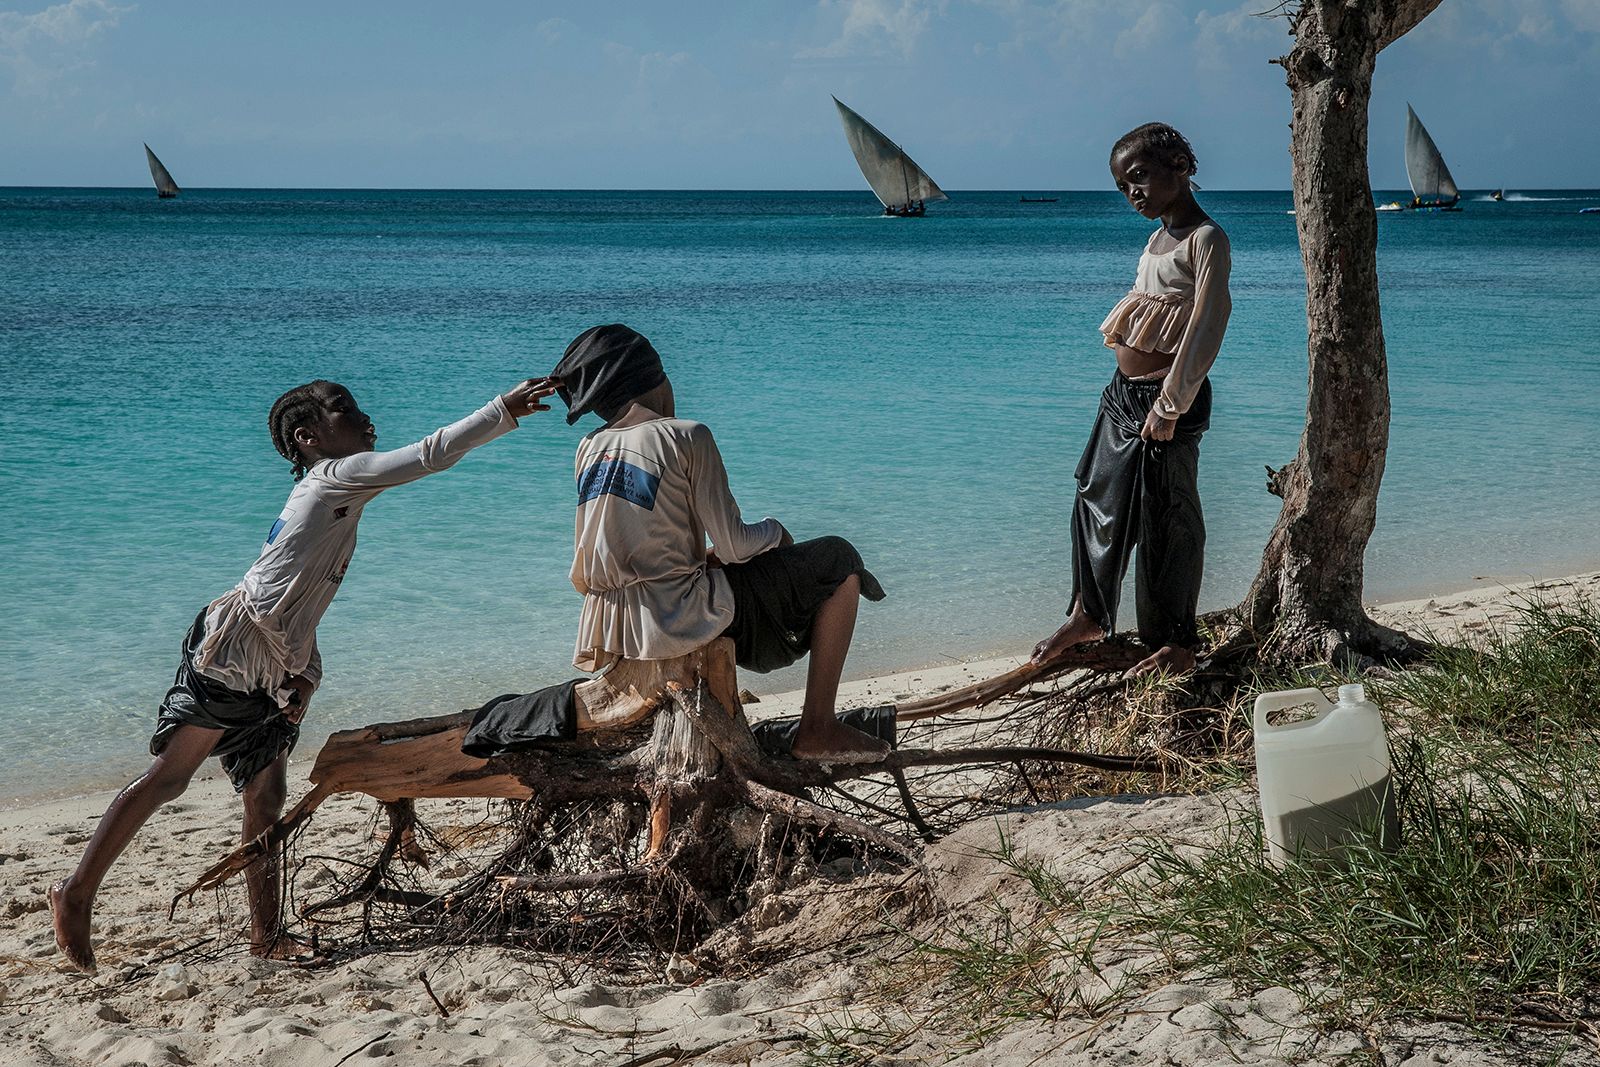 © Anna Boyiazis - Students rest on shore after their lesson in Kendwa, Zanzibar.